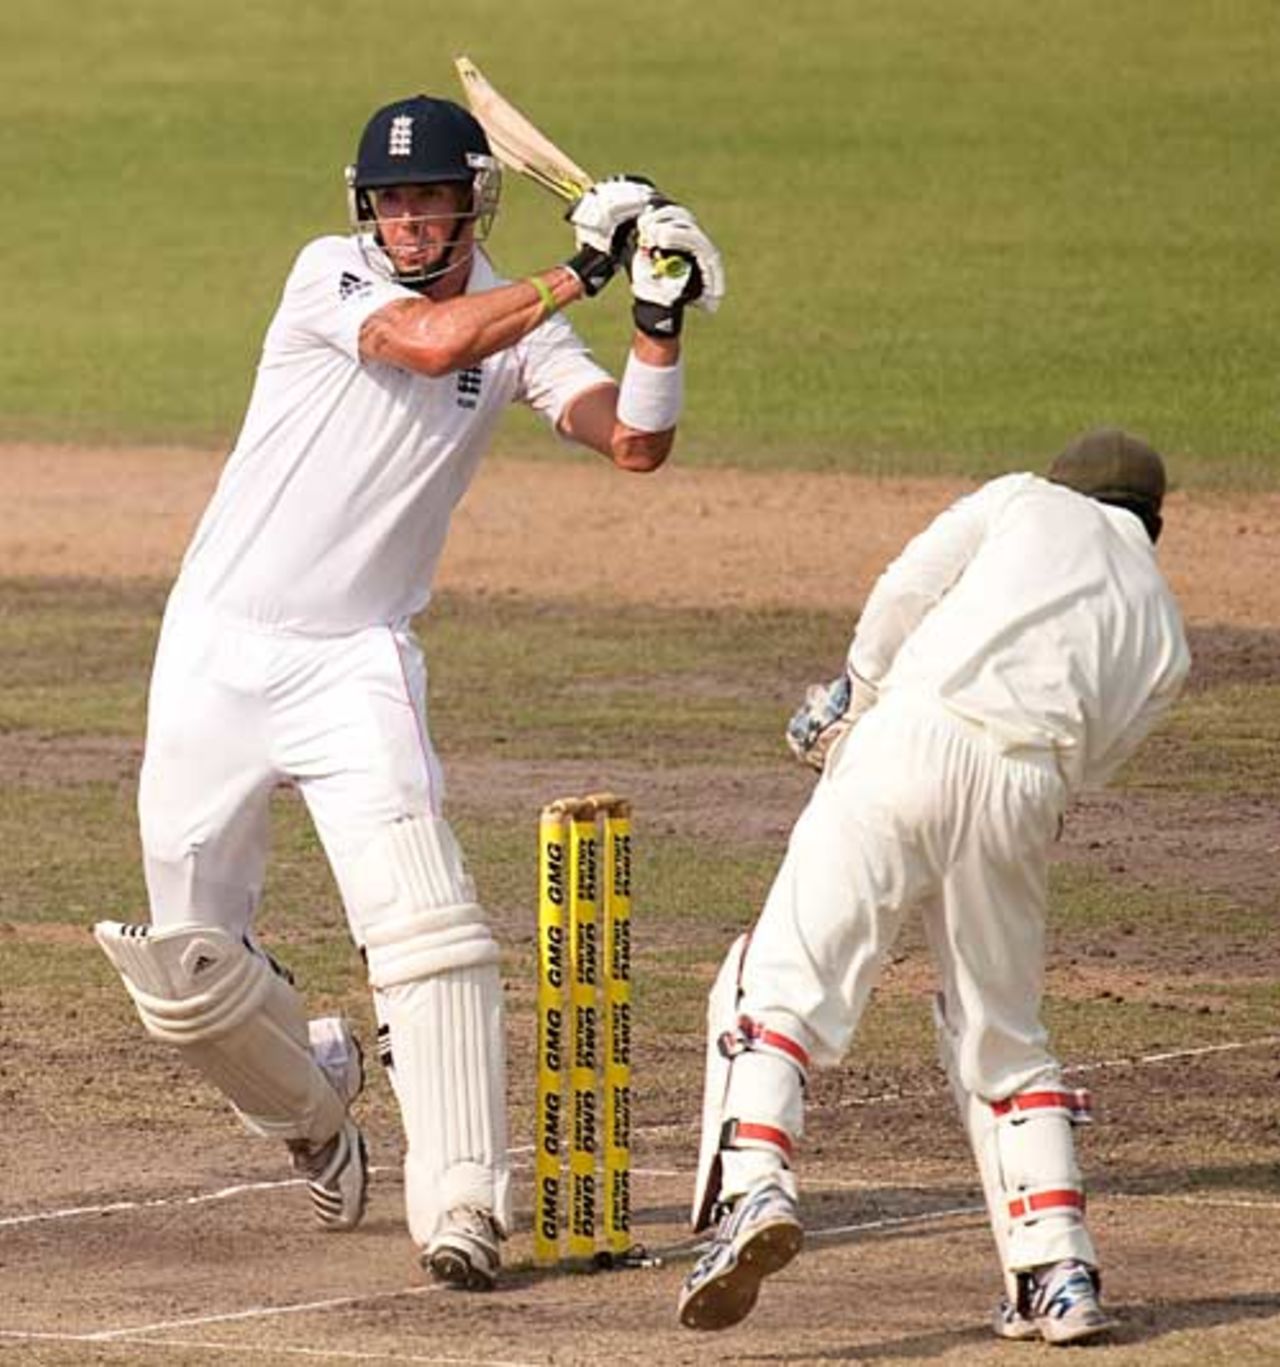 Kevin Pietersen became increasingly positive during his innings, Bangladesh v England, 2nd Test, Dhaka, 5th day, March 24, 2010